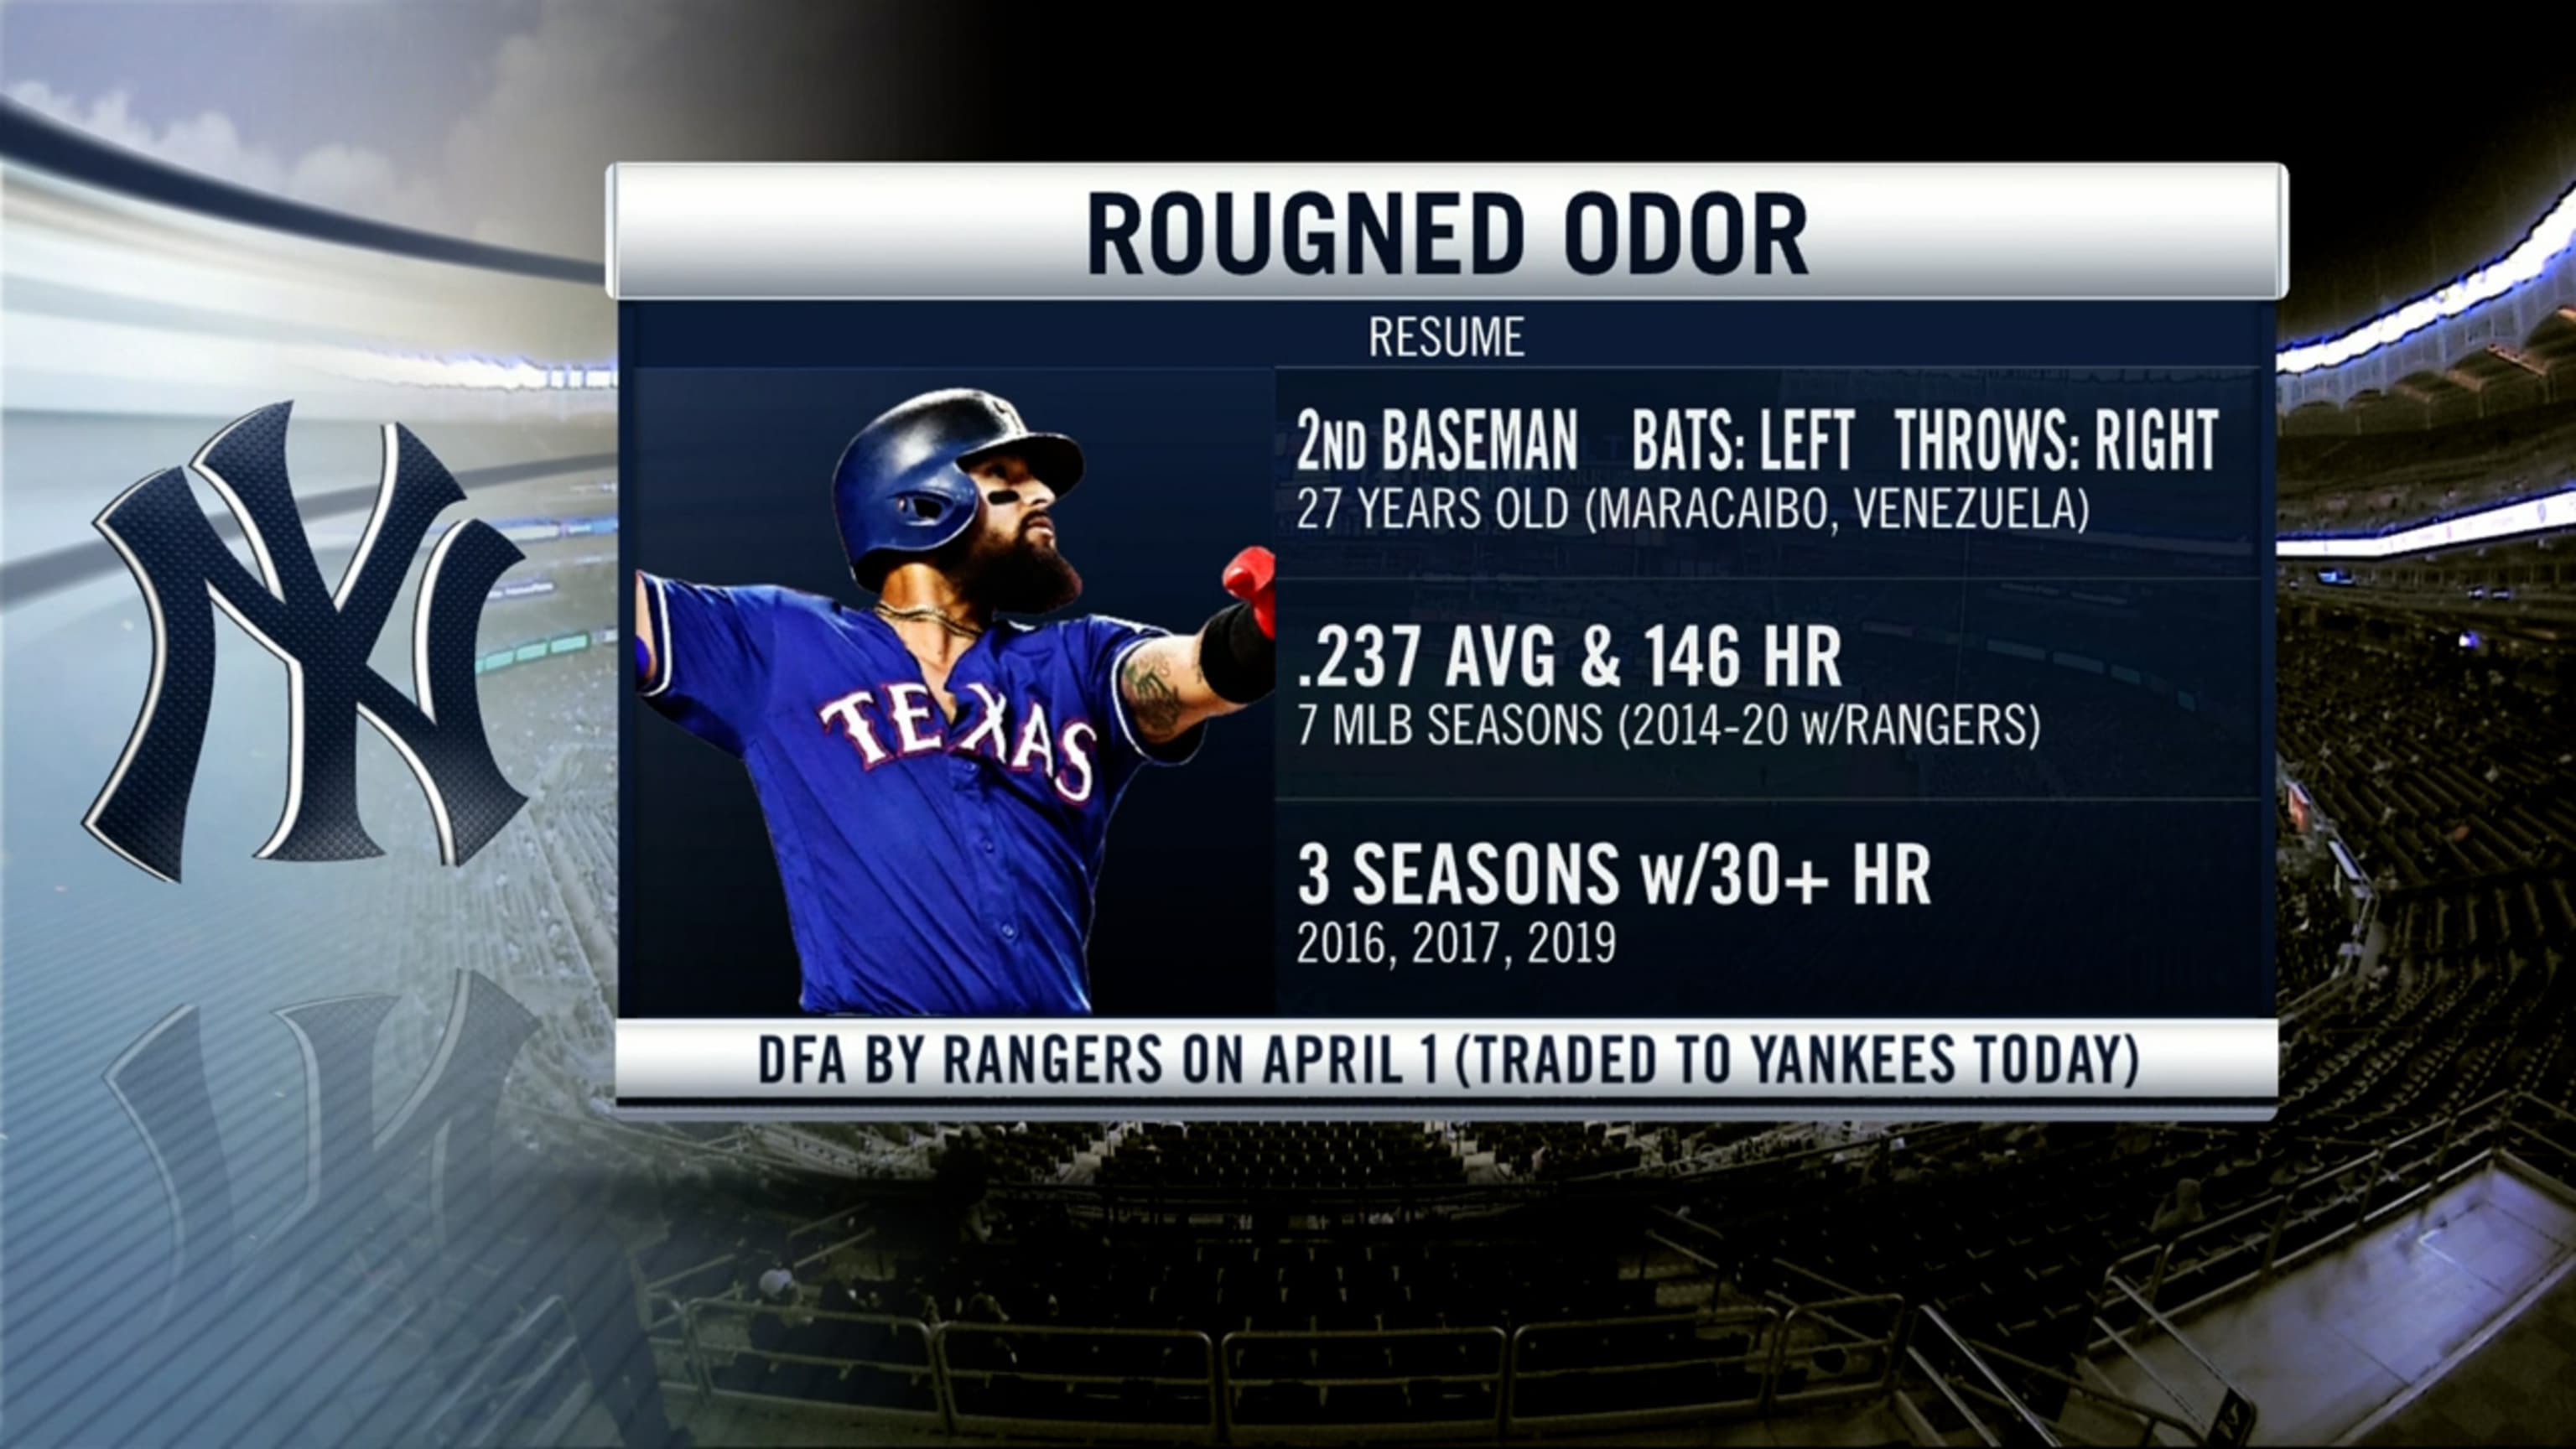 Rougned Odor comes off IL for NY Yankees' game tonight